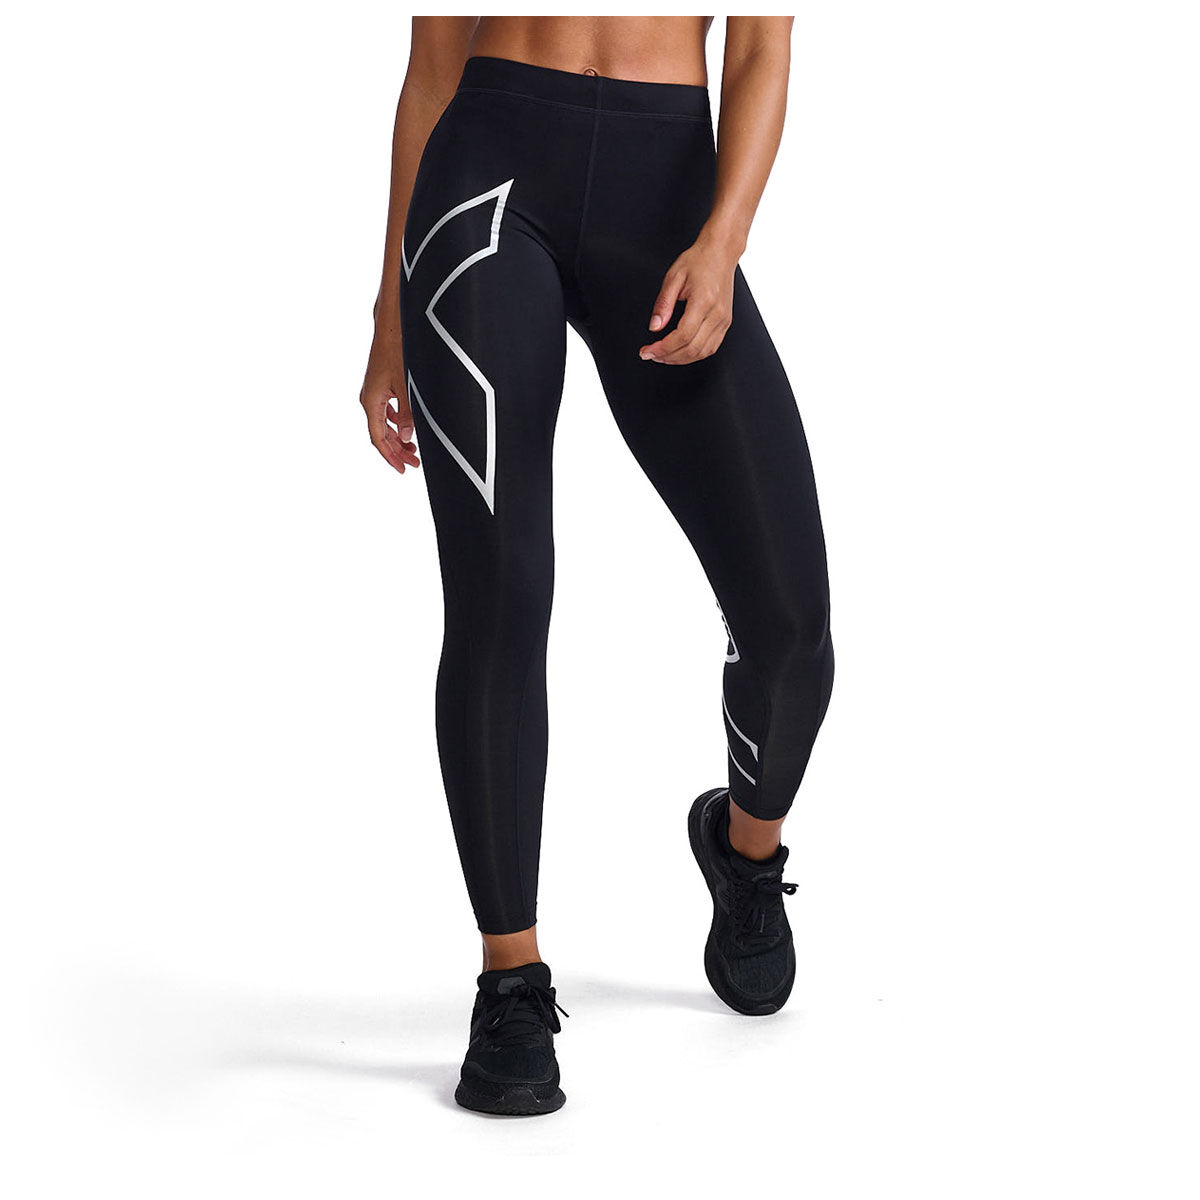 Buy Nike Men`s Pro Therma Compression Tights at Ubuy India